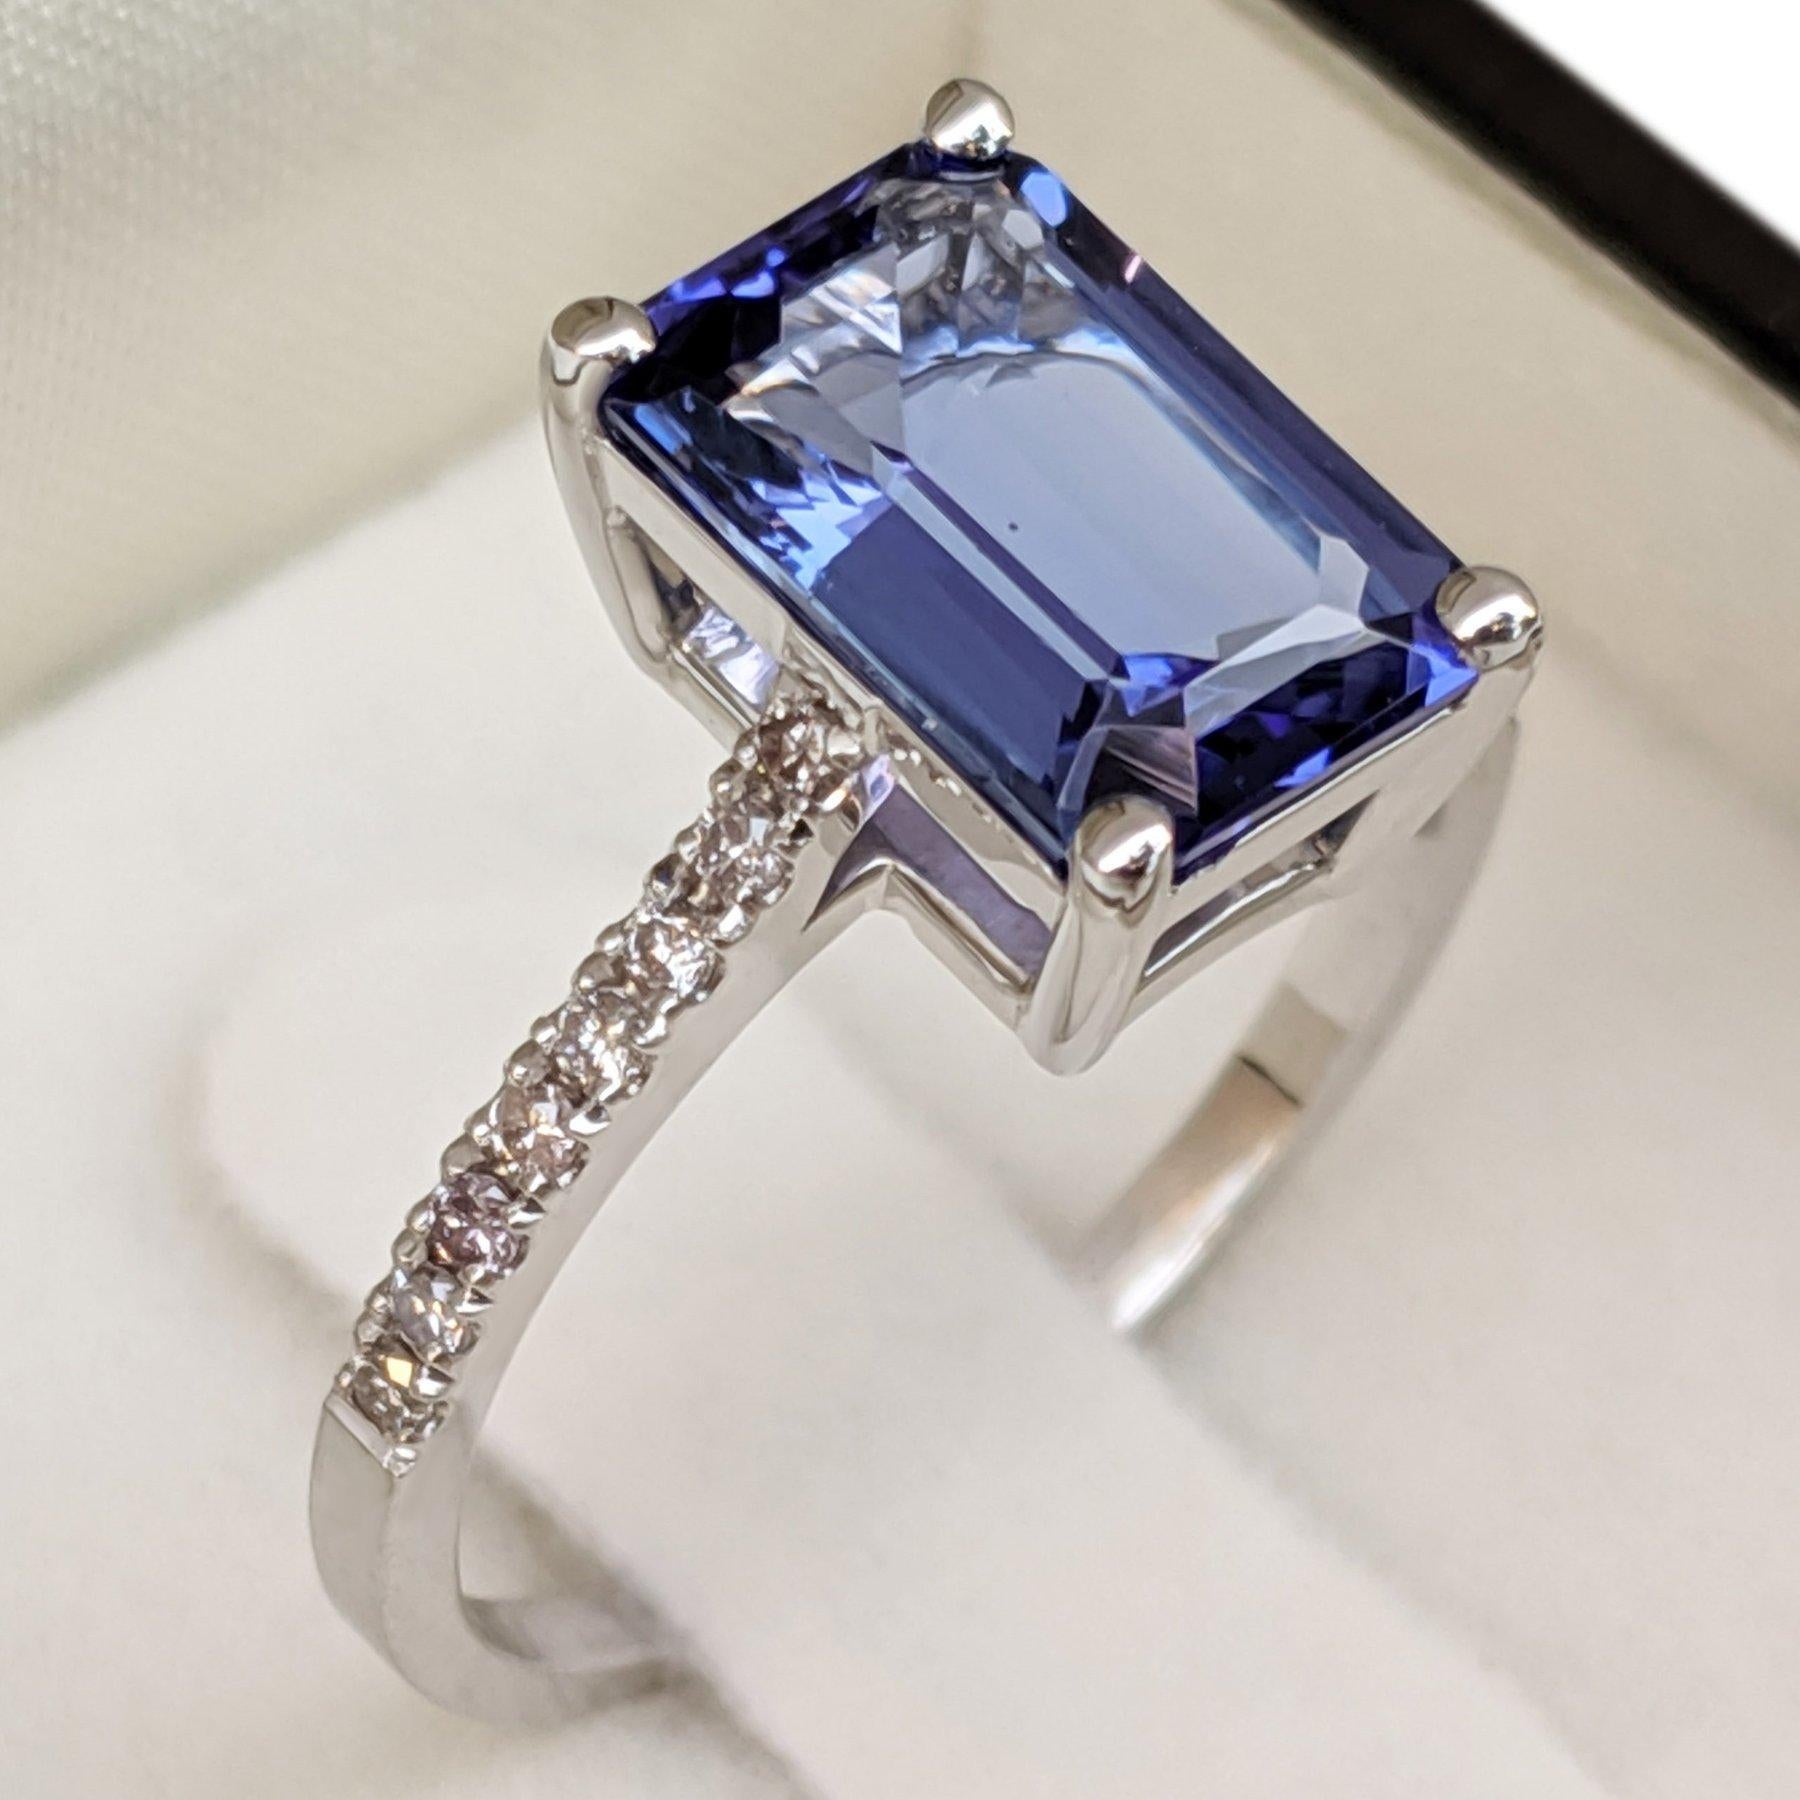 Cushion Cut $1 NO RESERVE!   2.80Ct Tanzanite & 0.18Ct Diamonds - 14 kt. White gold - Ring For Sale